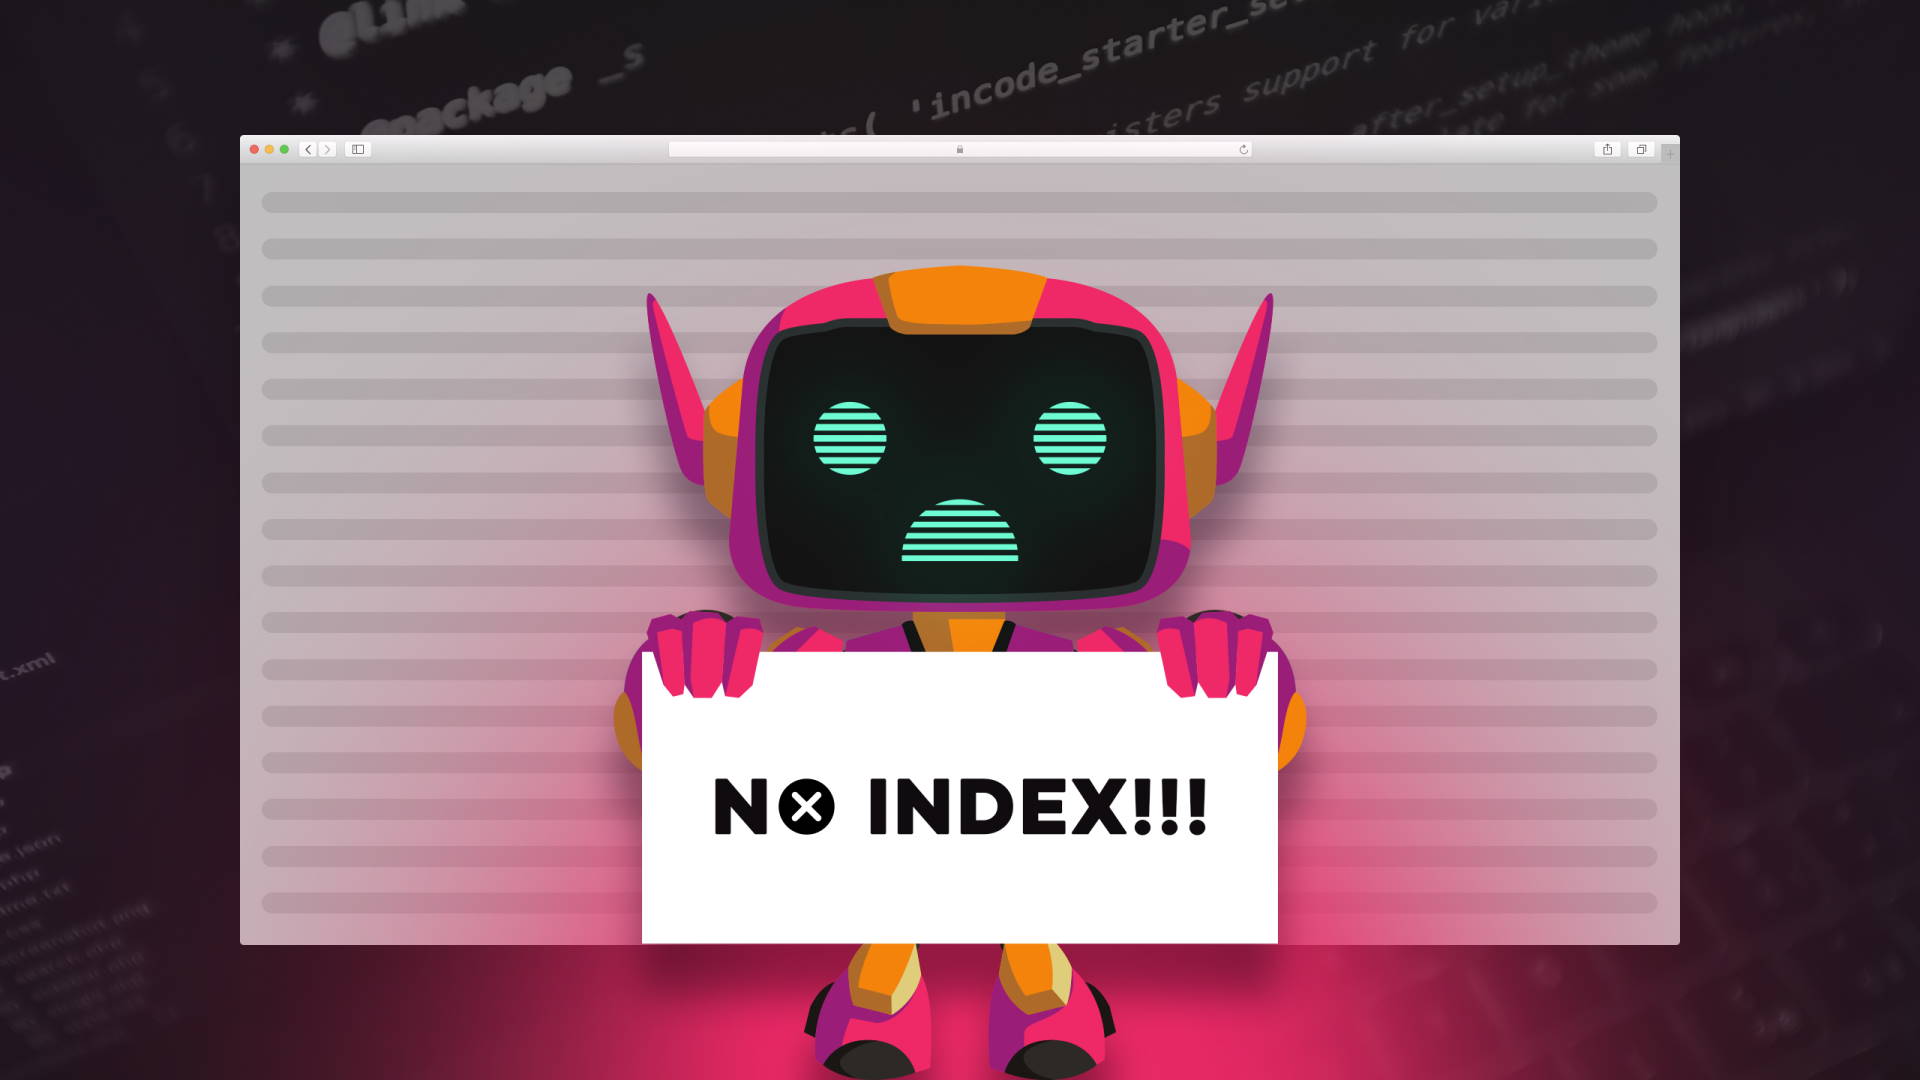 noindex tag